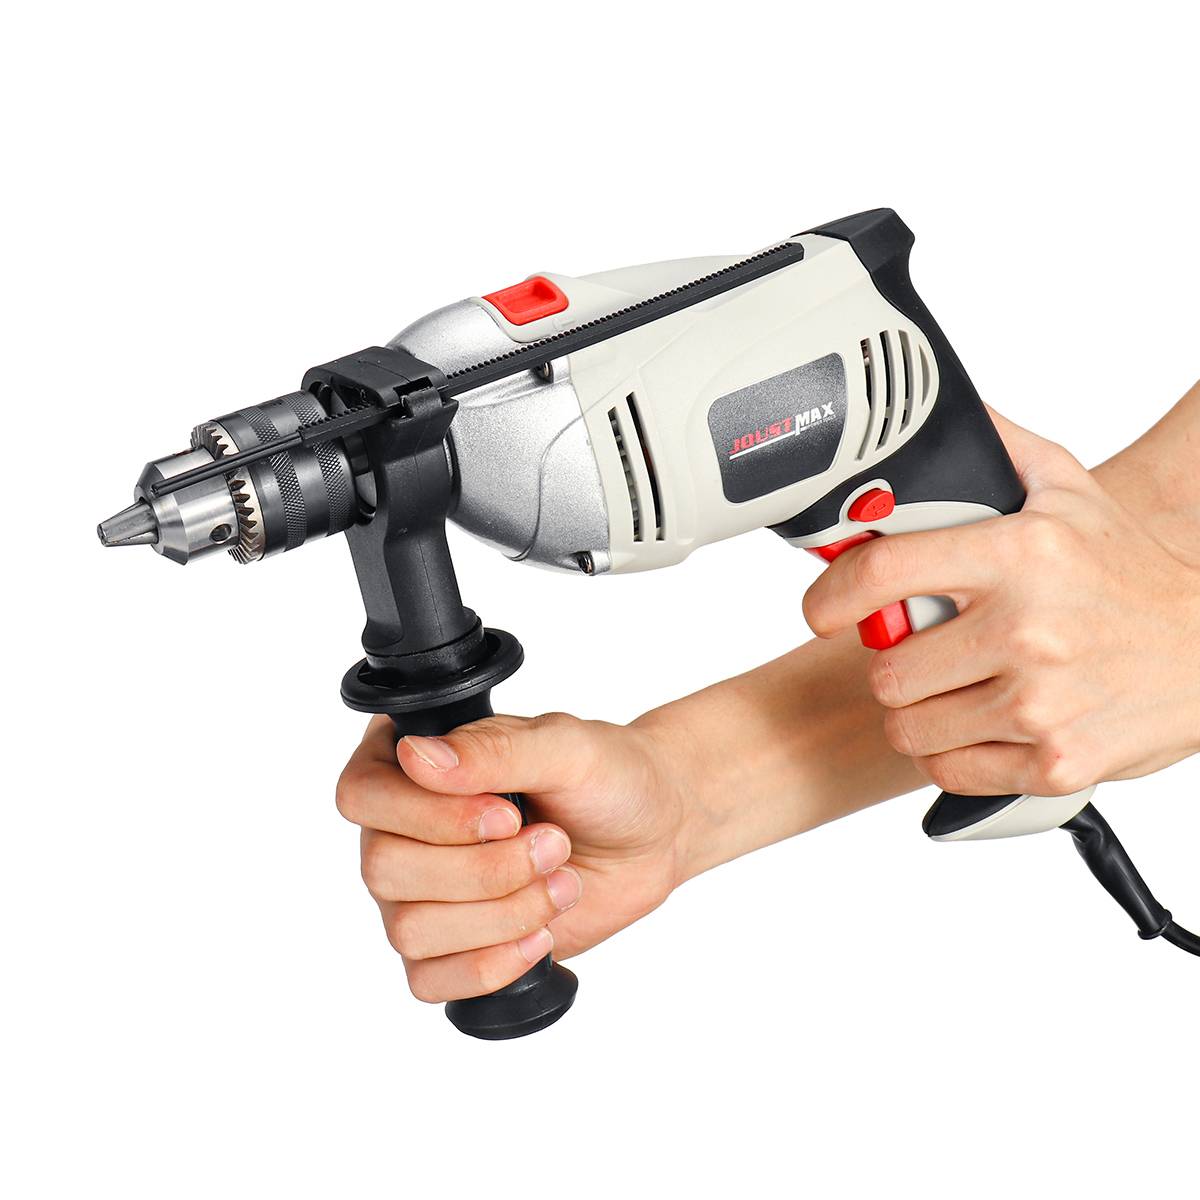 220V 750W Electric Hammer Drill Brushless Rotary Hammer Multi-function Impact Drill Power Drill Power Tools